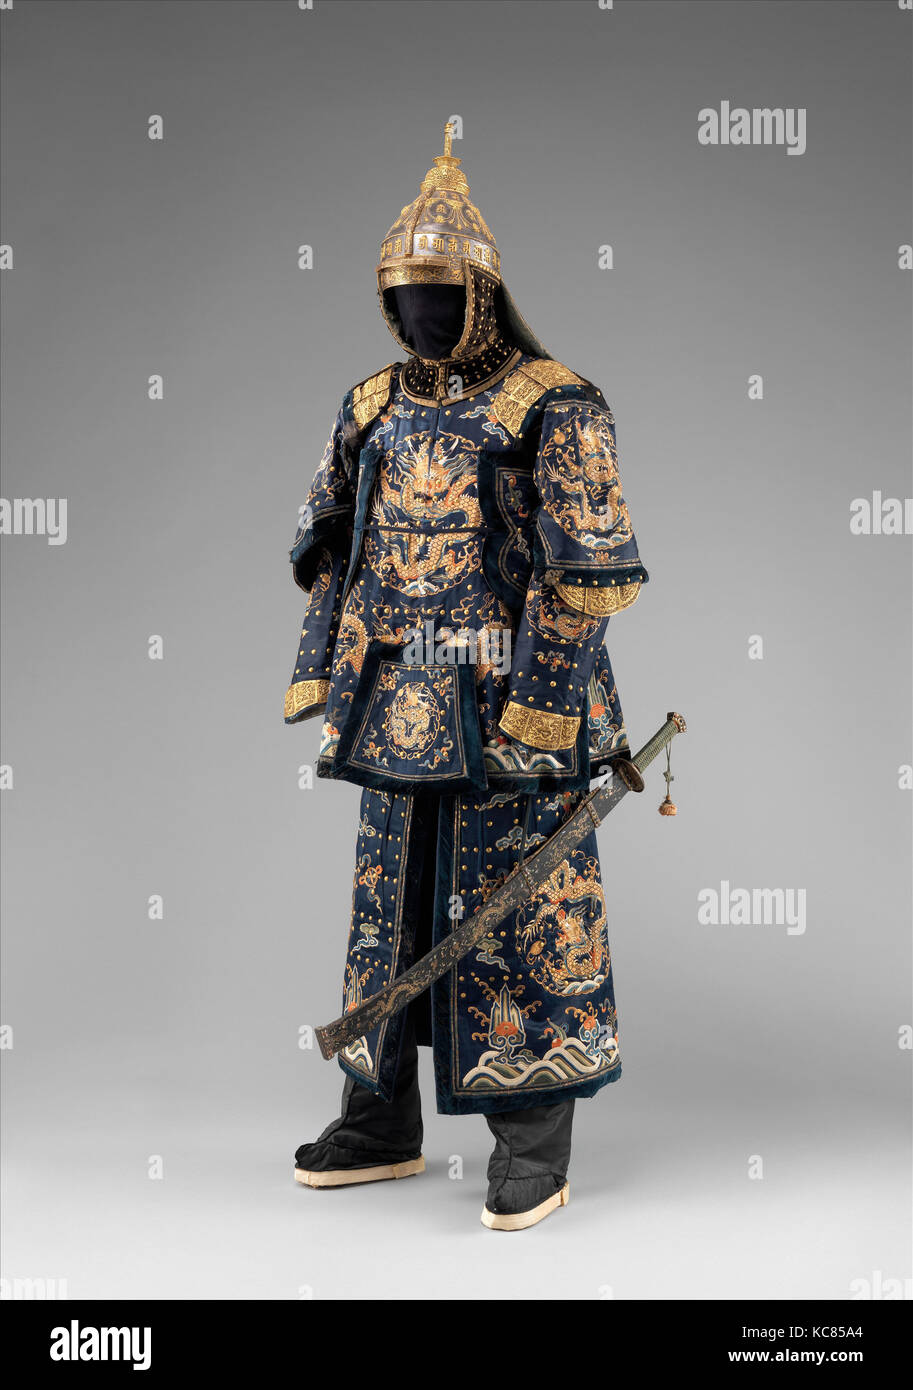 Armor of an Officer of the Imperial Palace Guard, 18th century Stock Photo